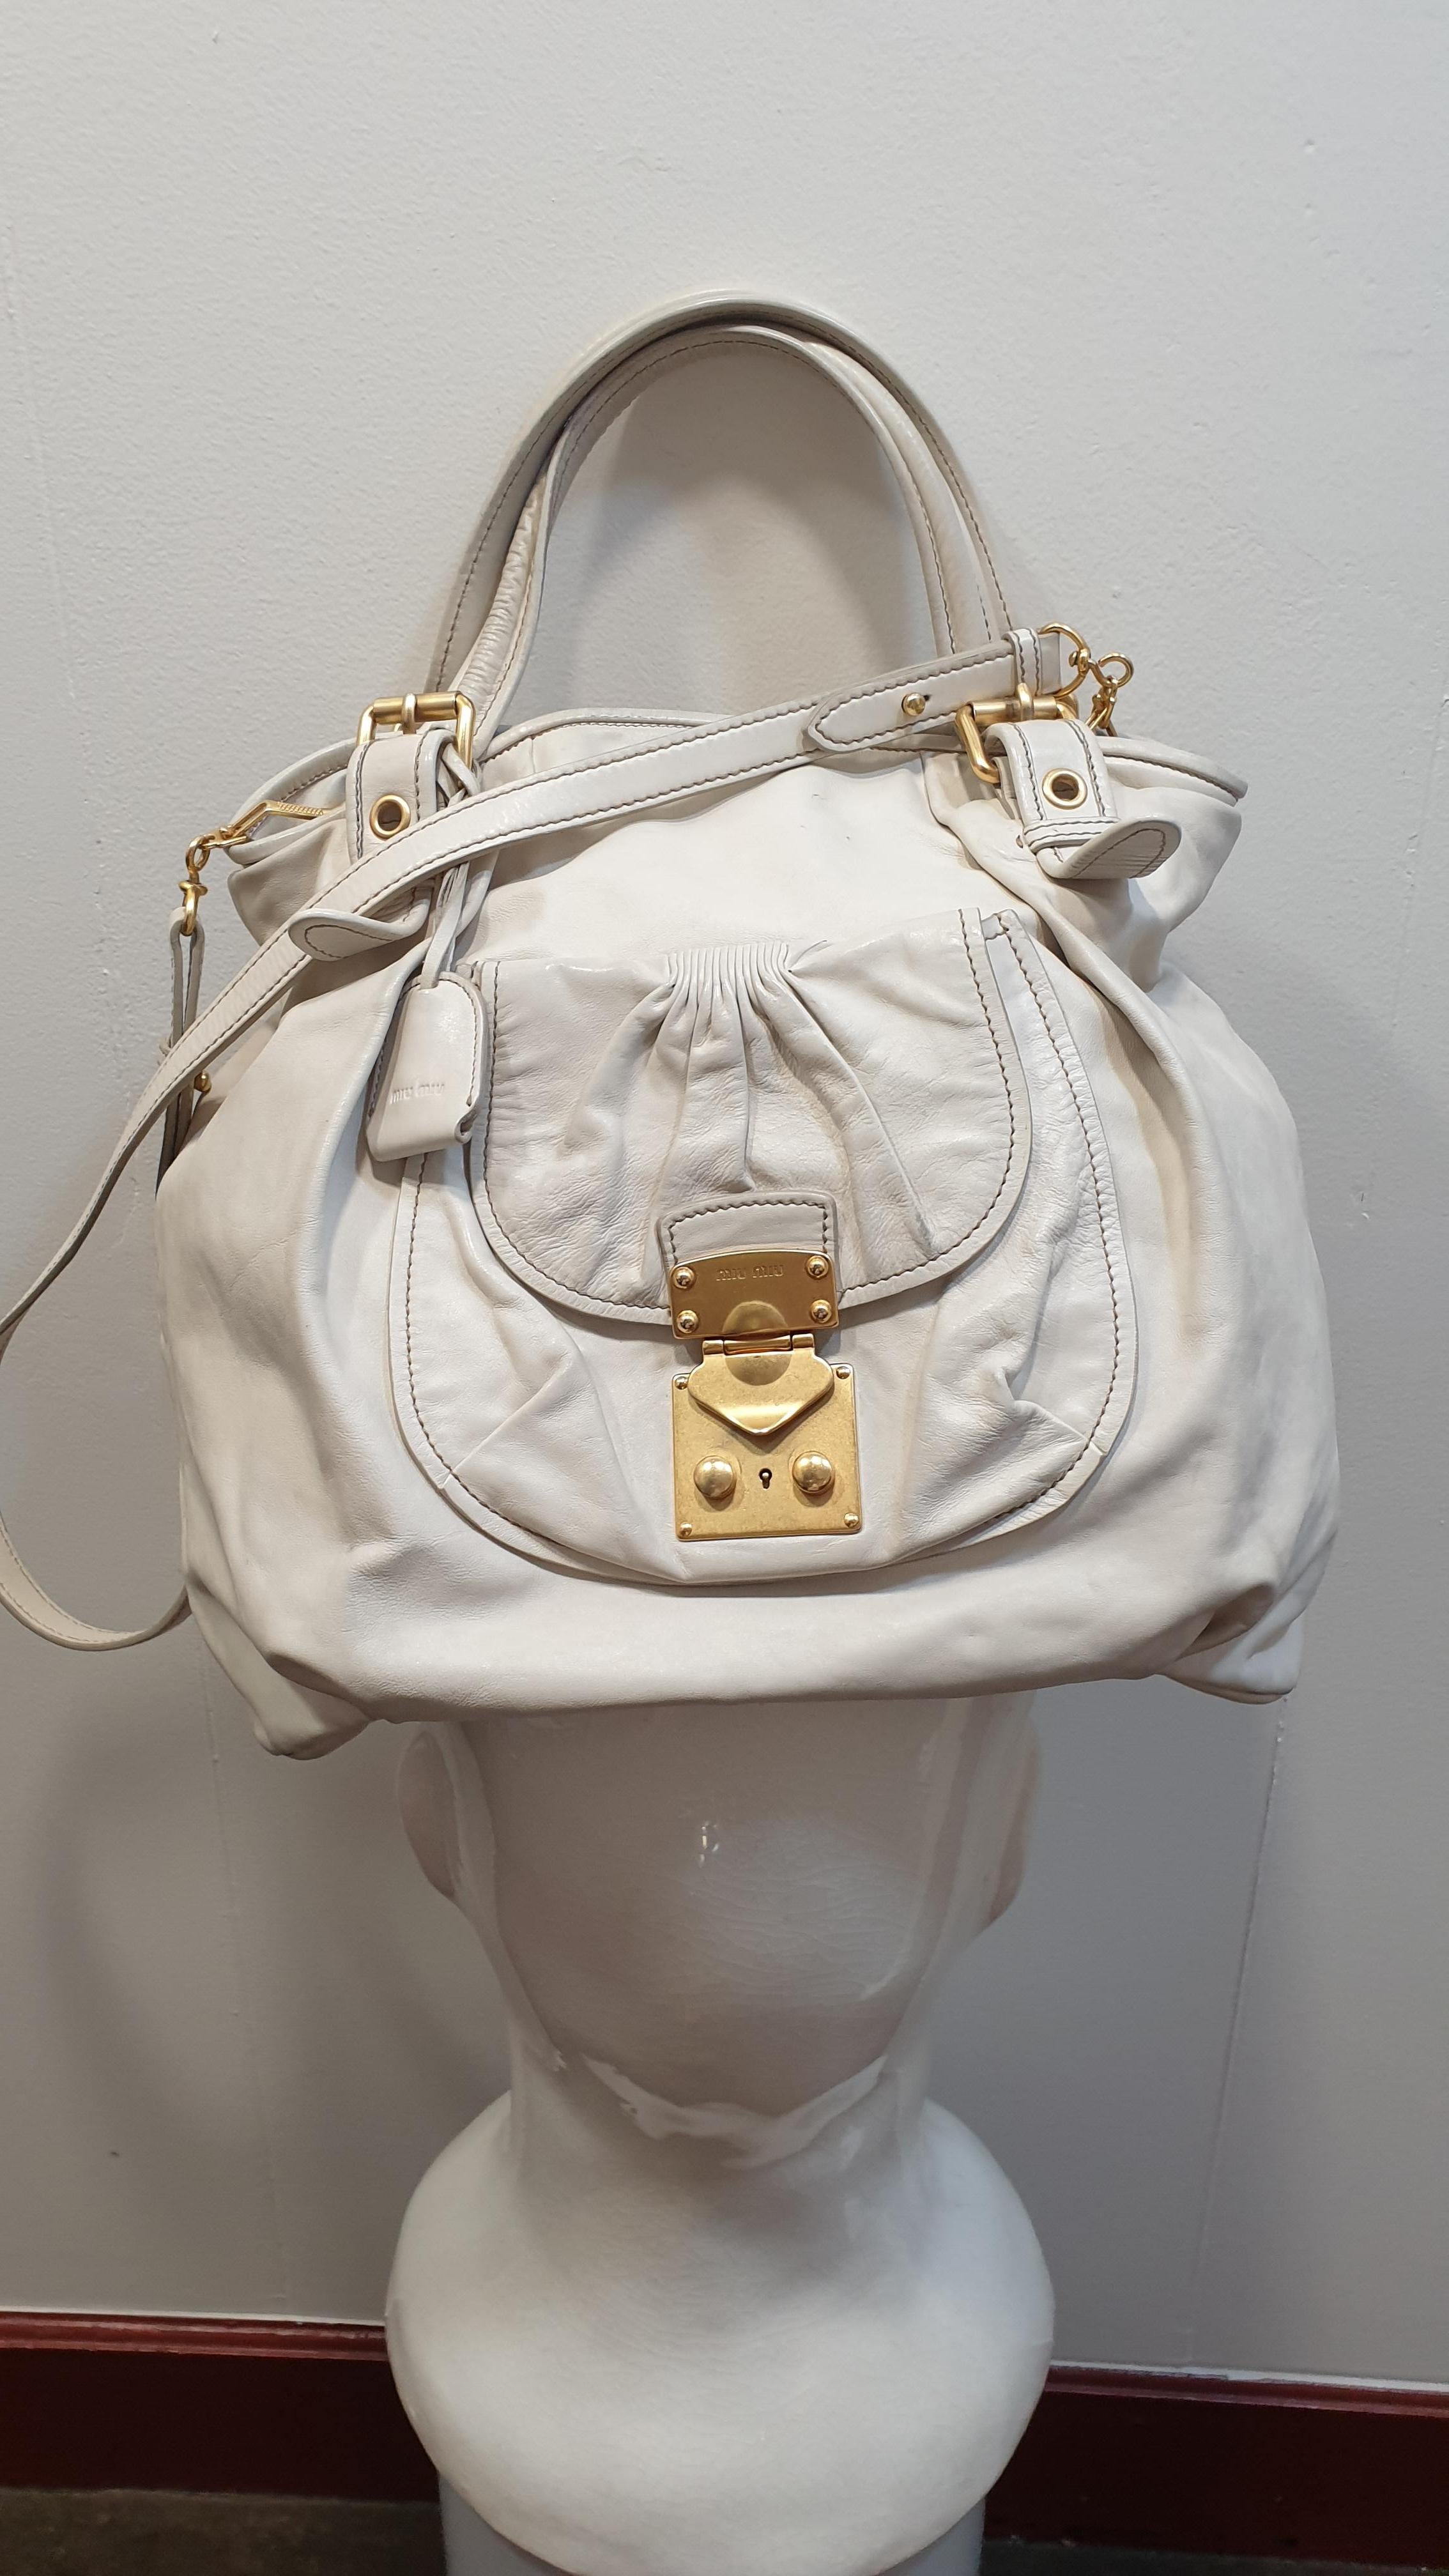 Coffer Shoulder Bag Matelasse Leather White by Miu Miu For Sale 1